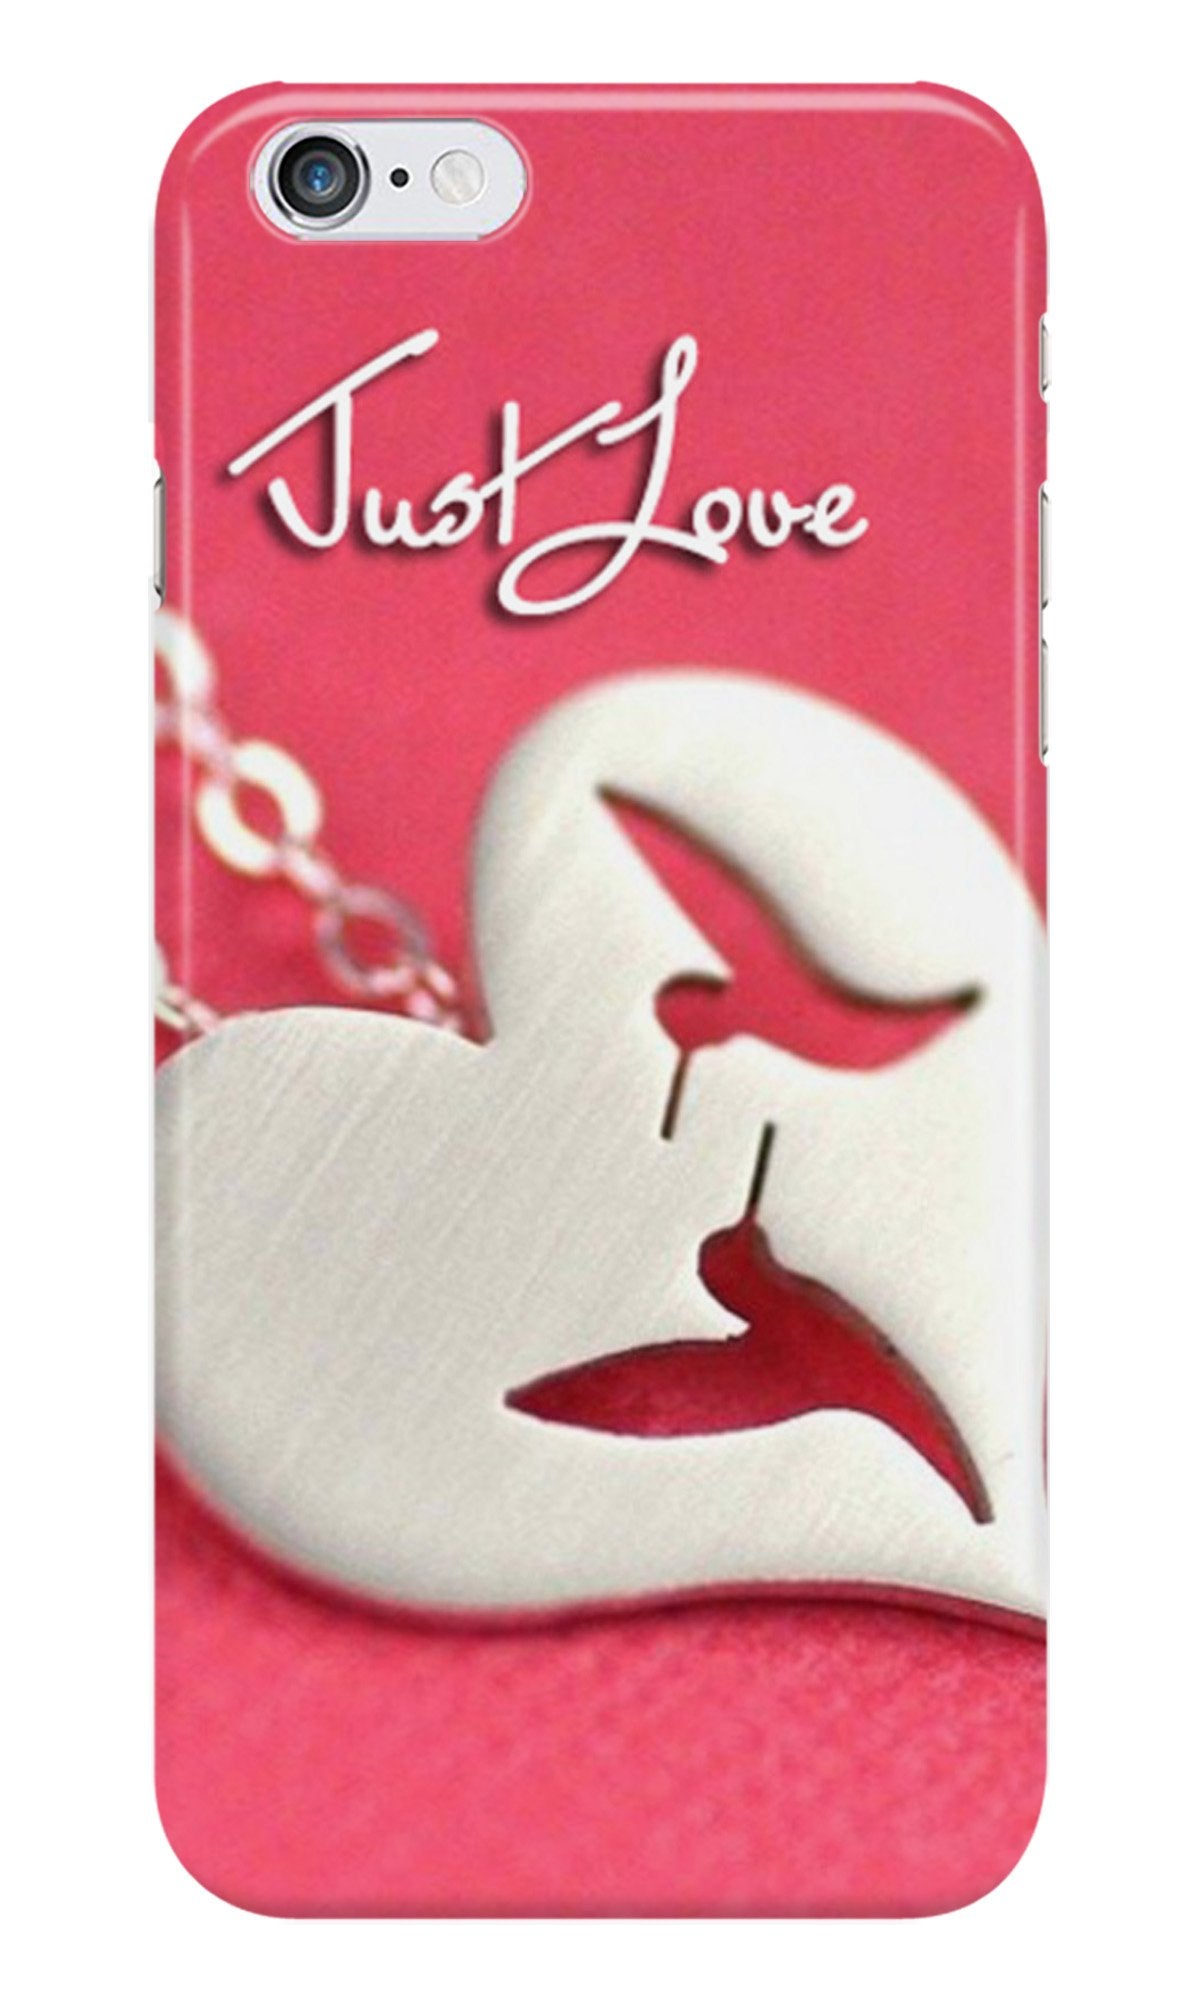 Just love Case for iPhone 6/ 6s